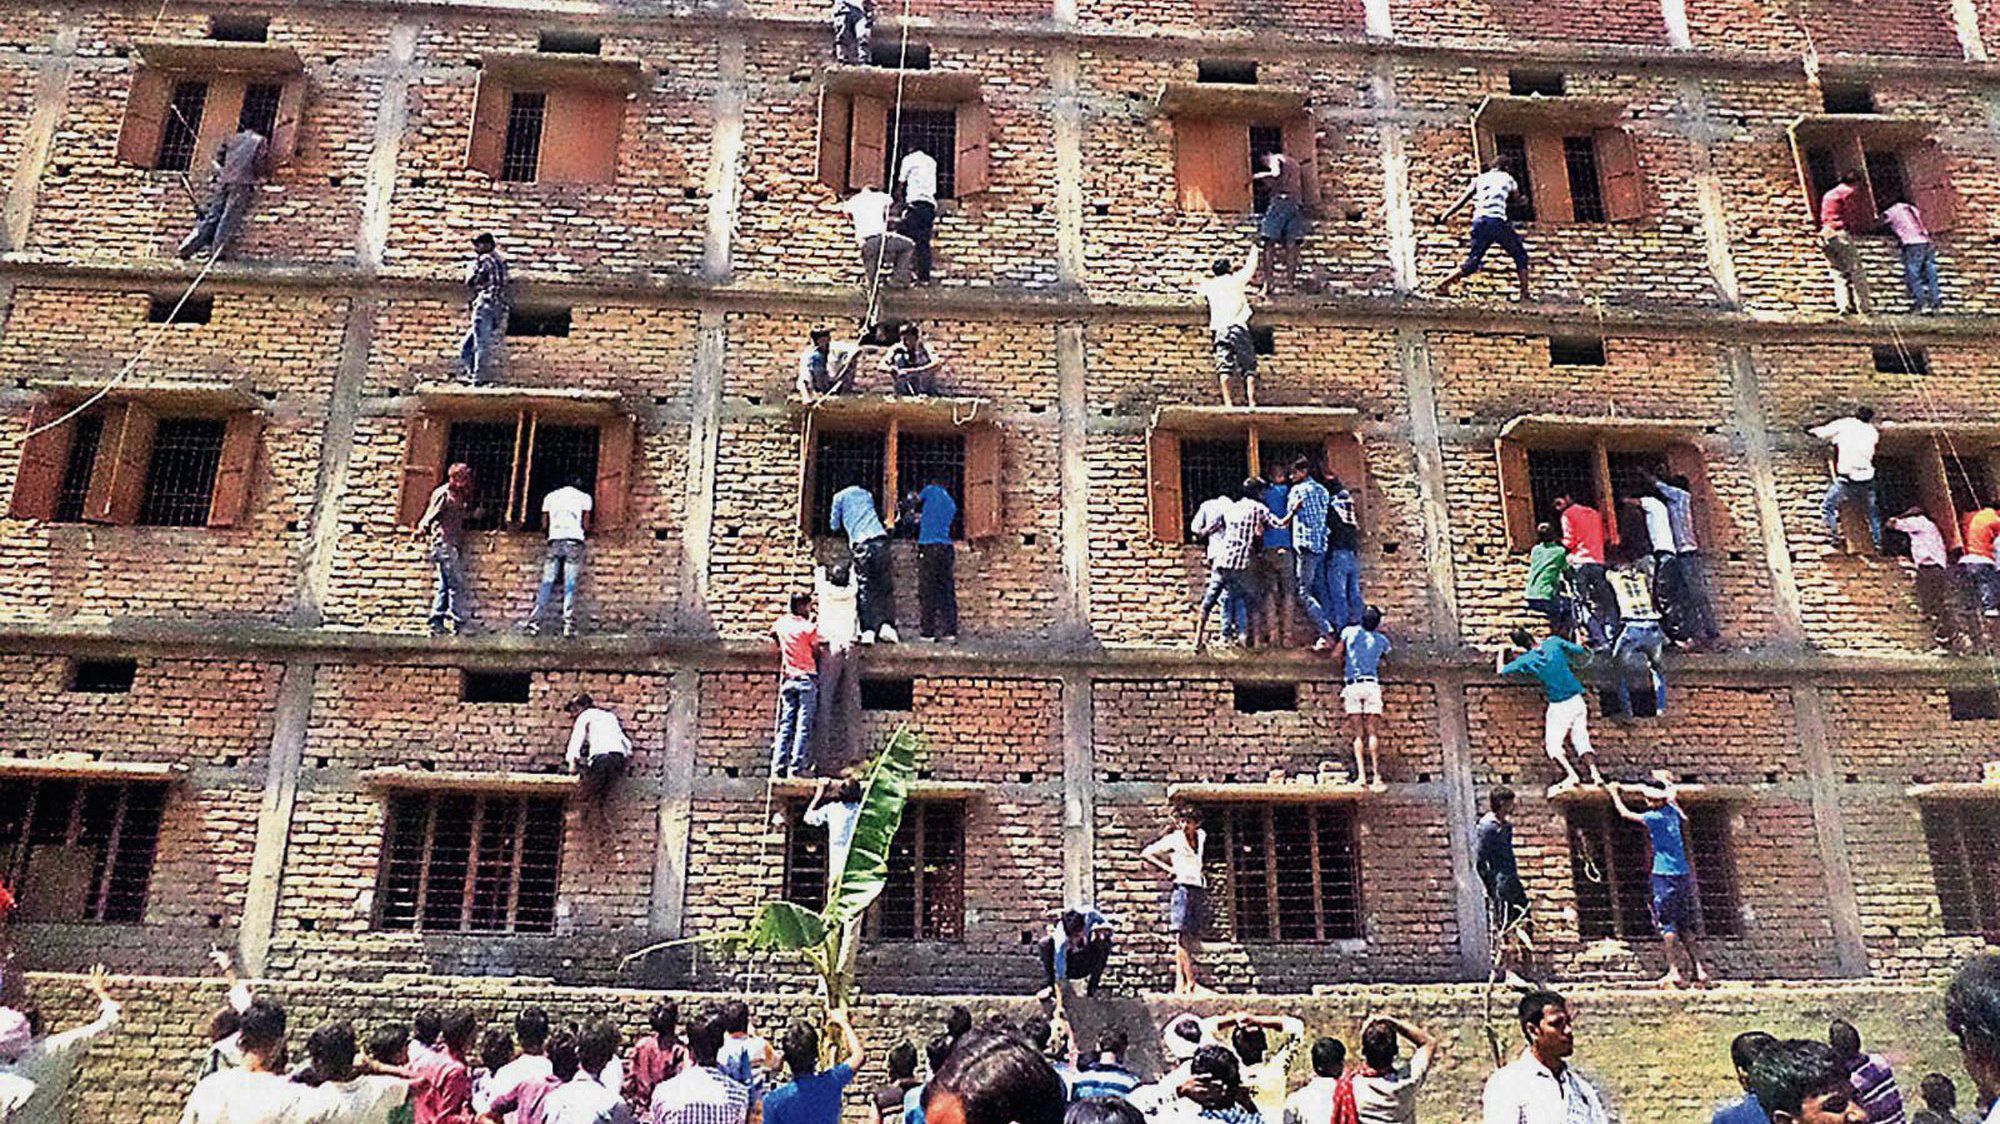 India tried to stop cheating in school — so half a million students just skipped exams